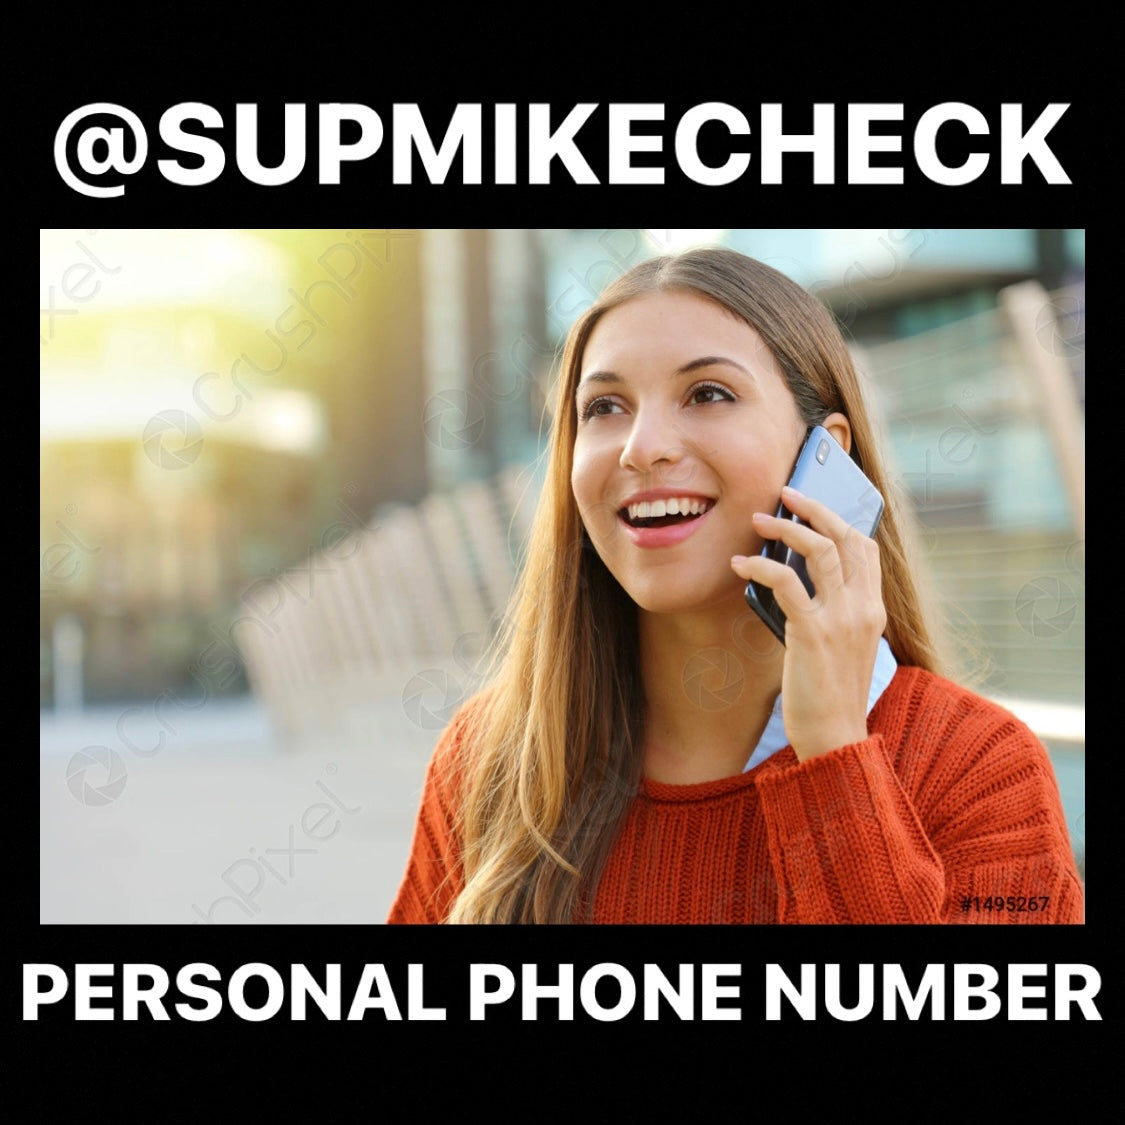 SUPMIKECHECK PERSONAL PHONE NUMBER